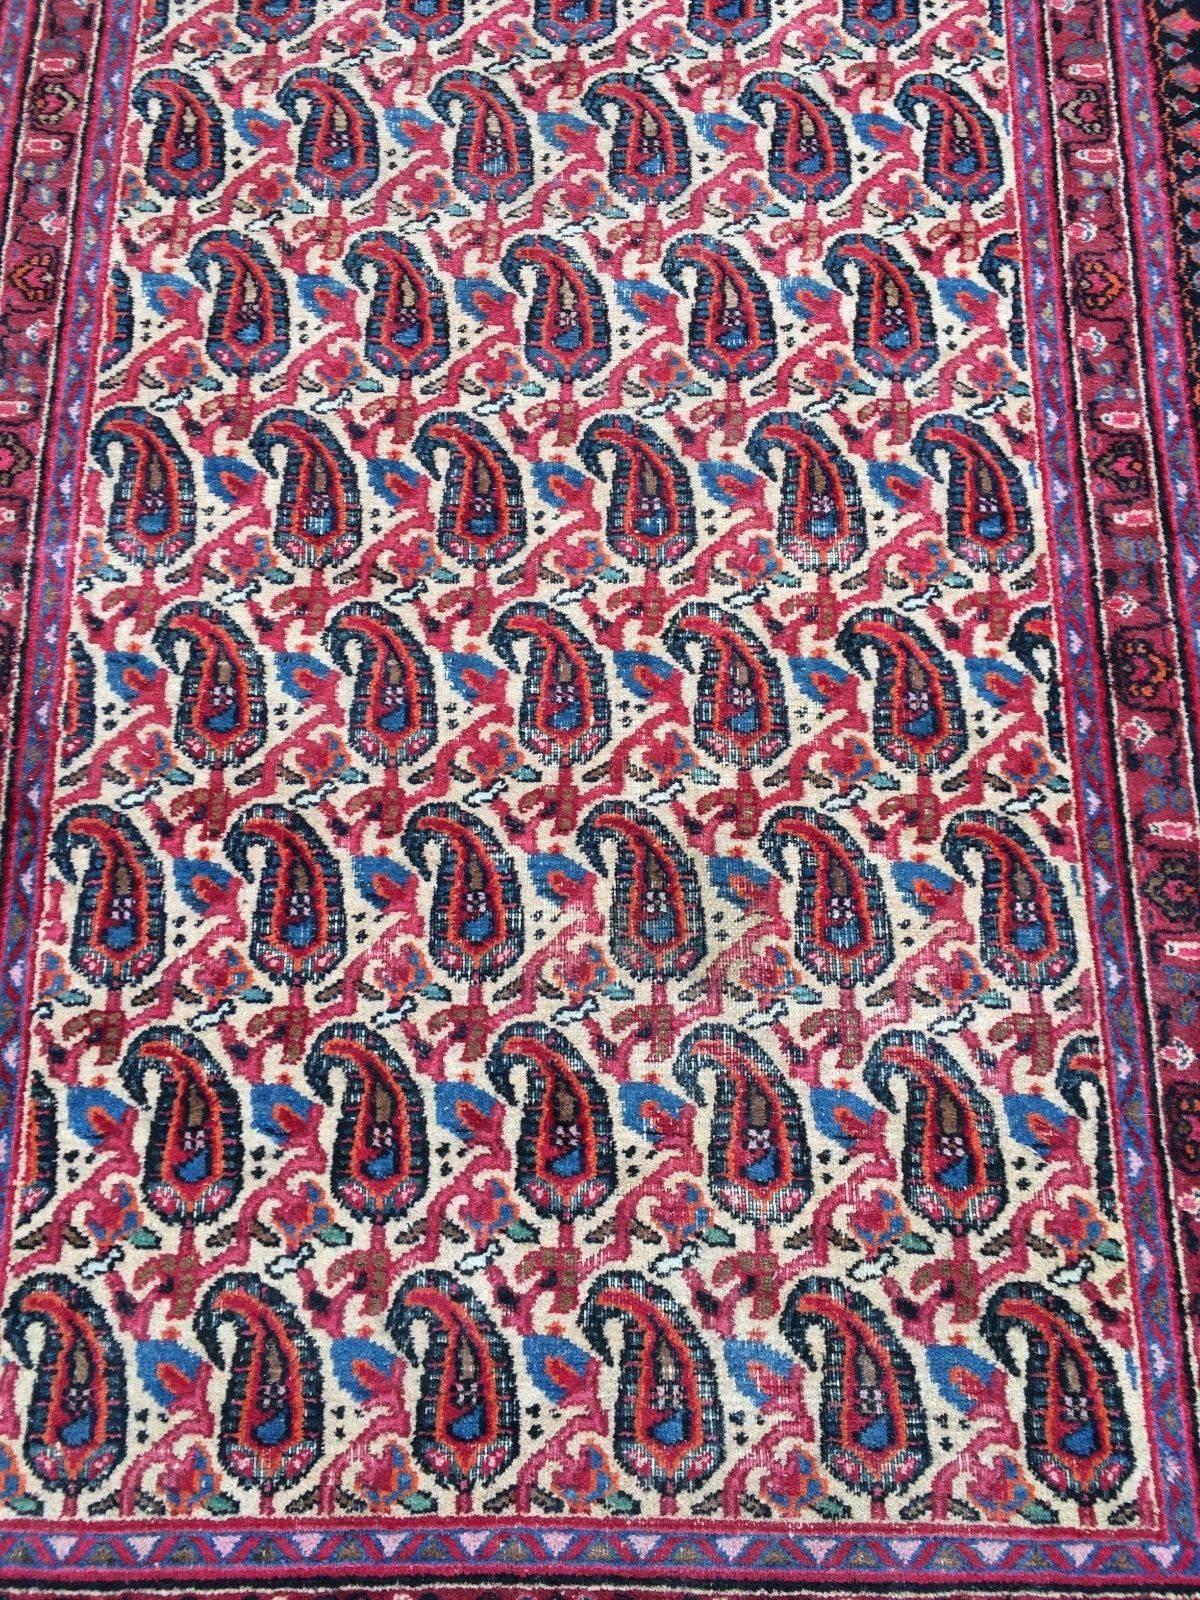 Gorgeous red and hook patterned wool Kashan rug. Measures: 5ft x 3ft.